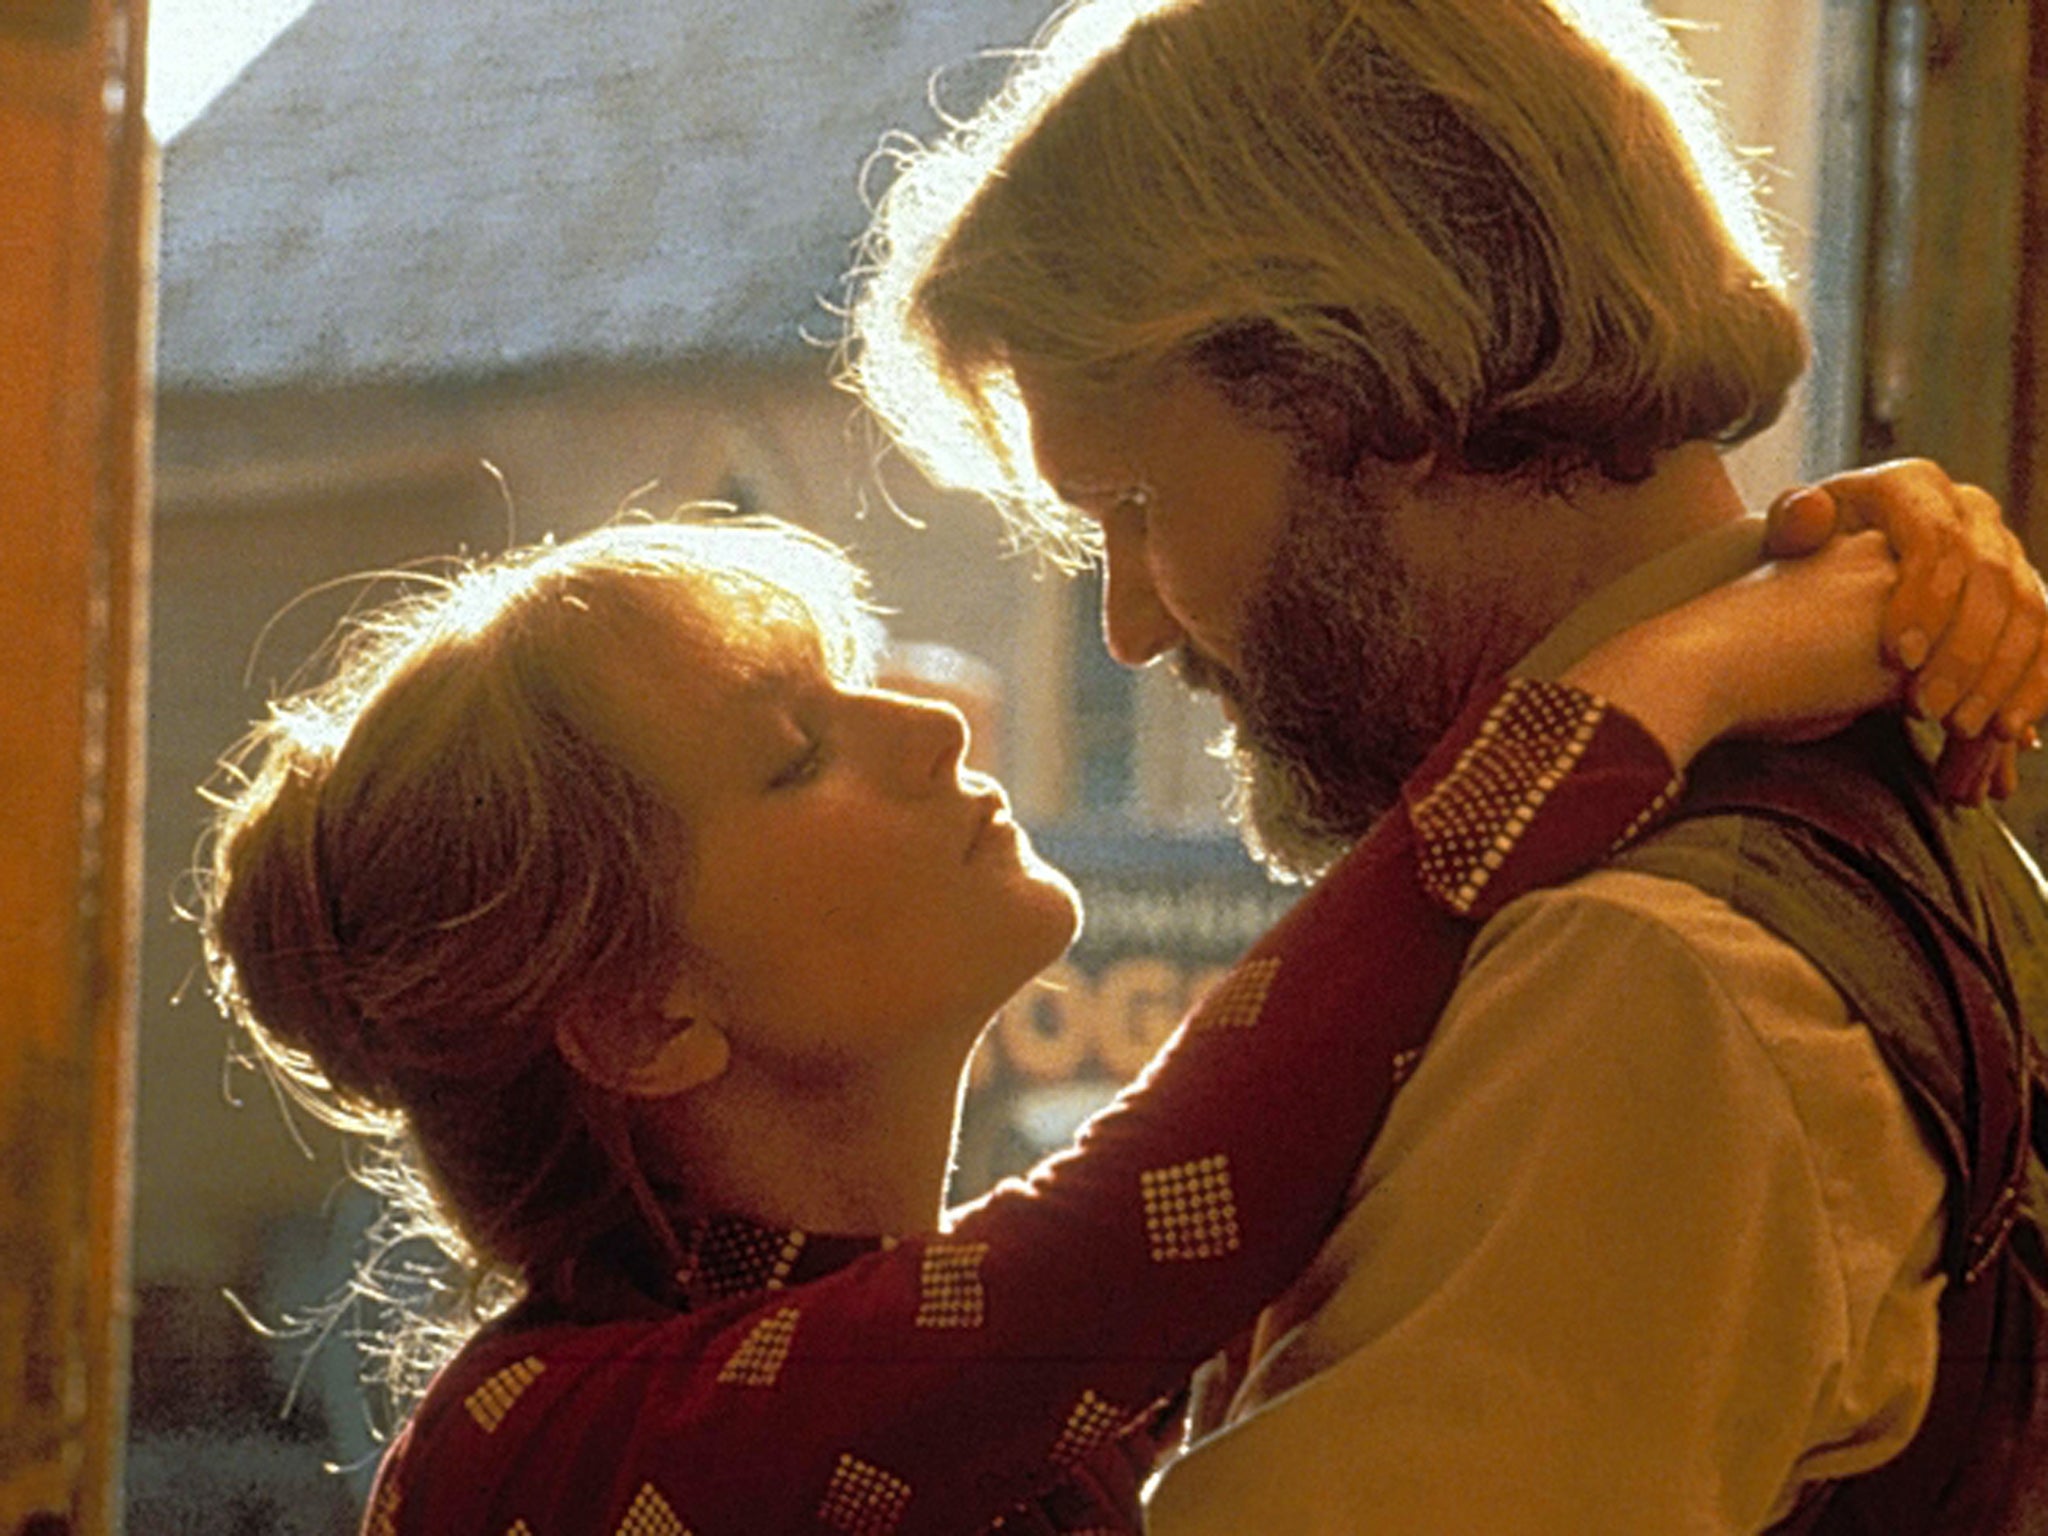 Trouble in paradise: Isabelle Huppert and Kris Kristofferson in the box-office flop 'Heaven's Gate'